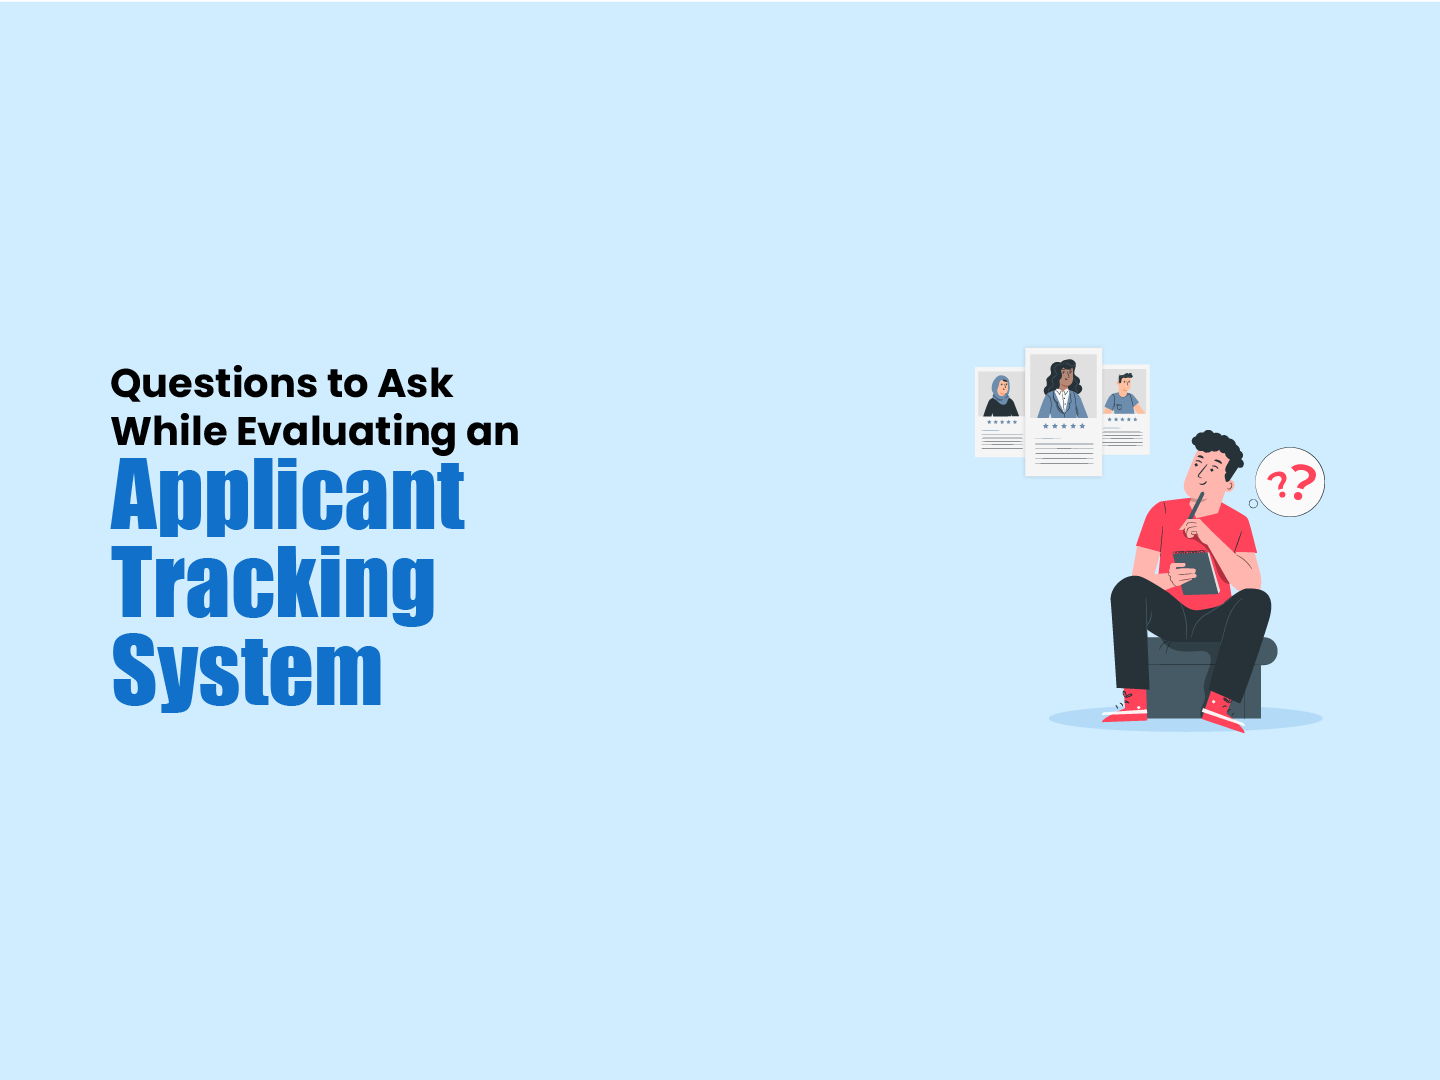 Questions to Ask While Evaluating an Applicant Tracking System